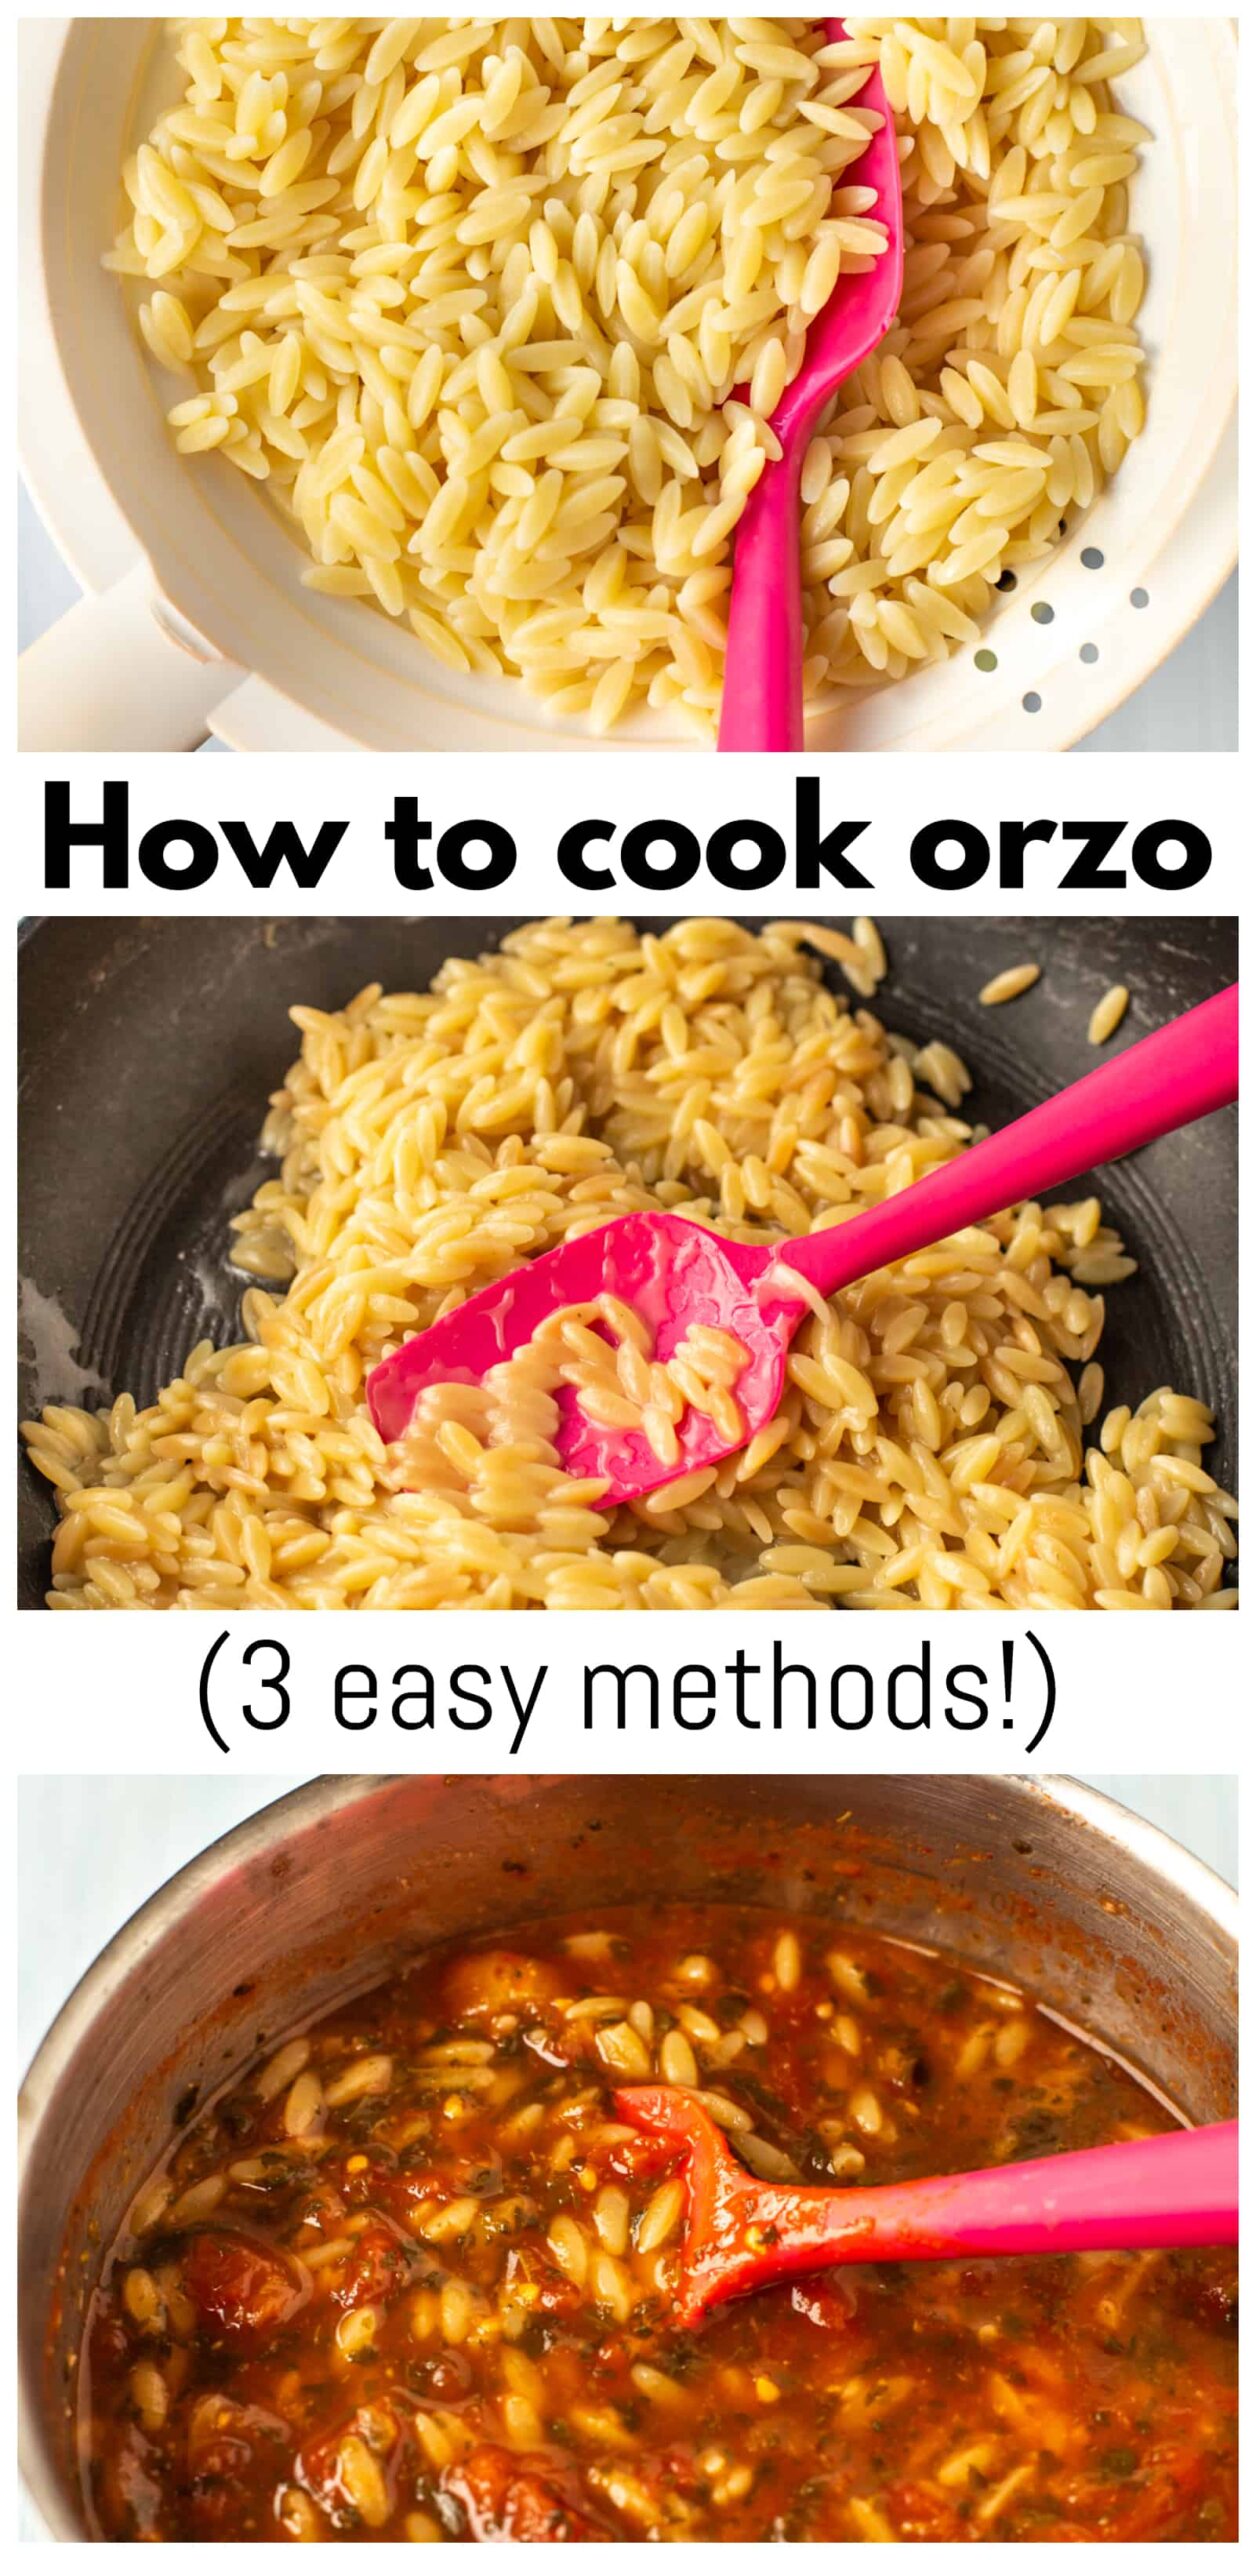 Collage showing 3 different ways to cook orzo.